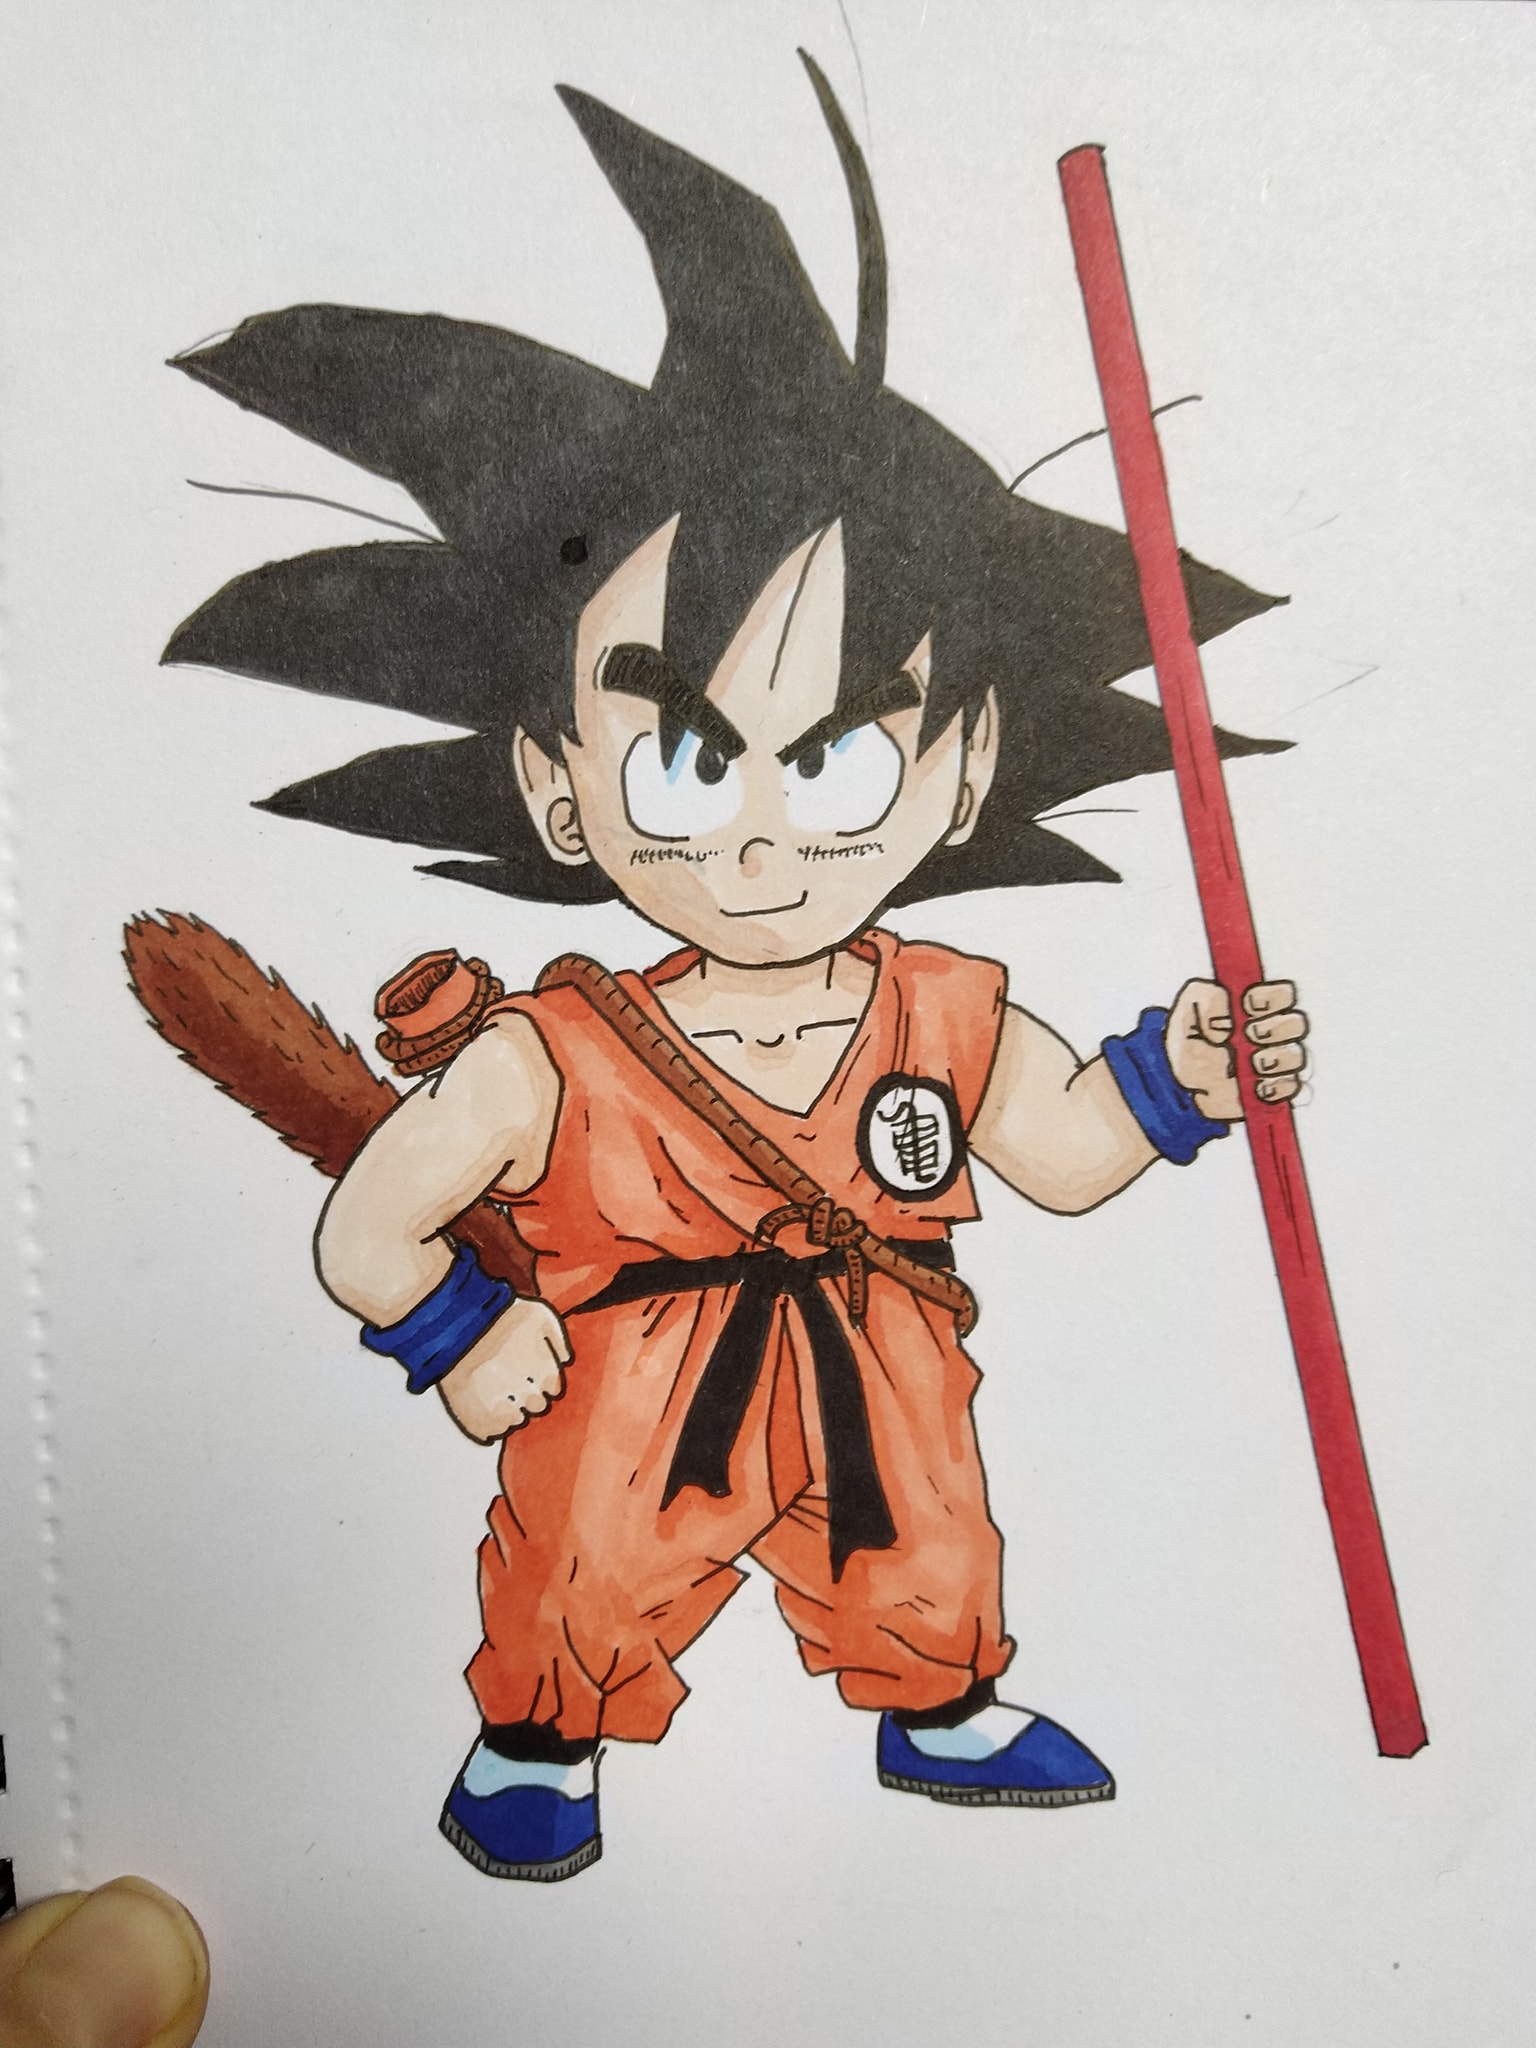 Alcohol marker illustration of Goku from the anime series 'Dragonball'.